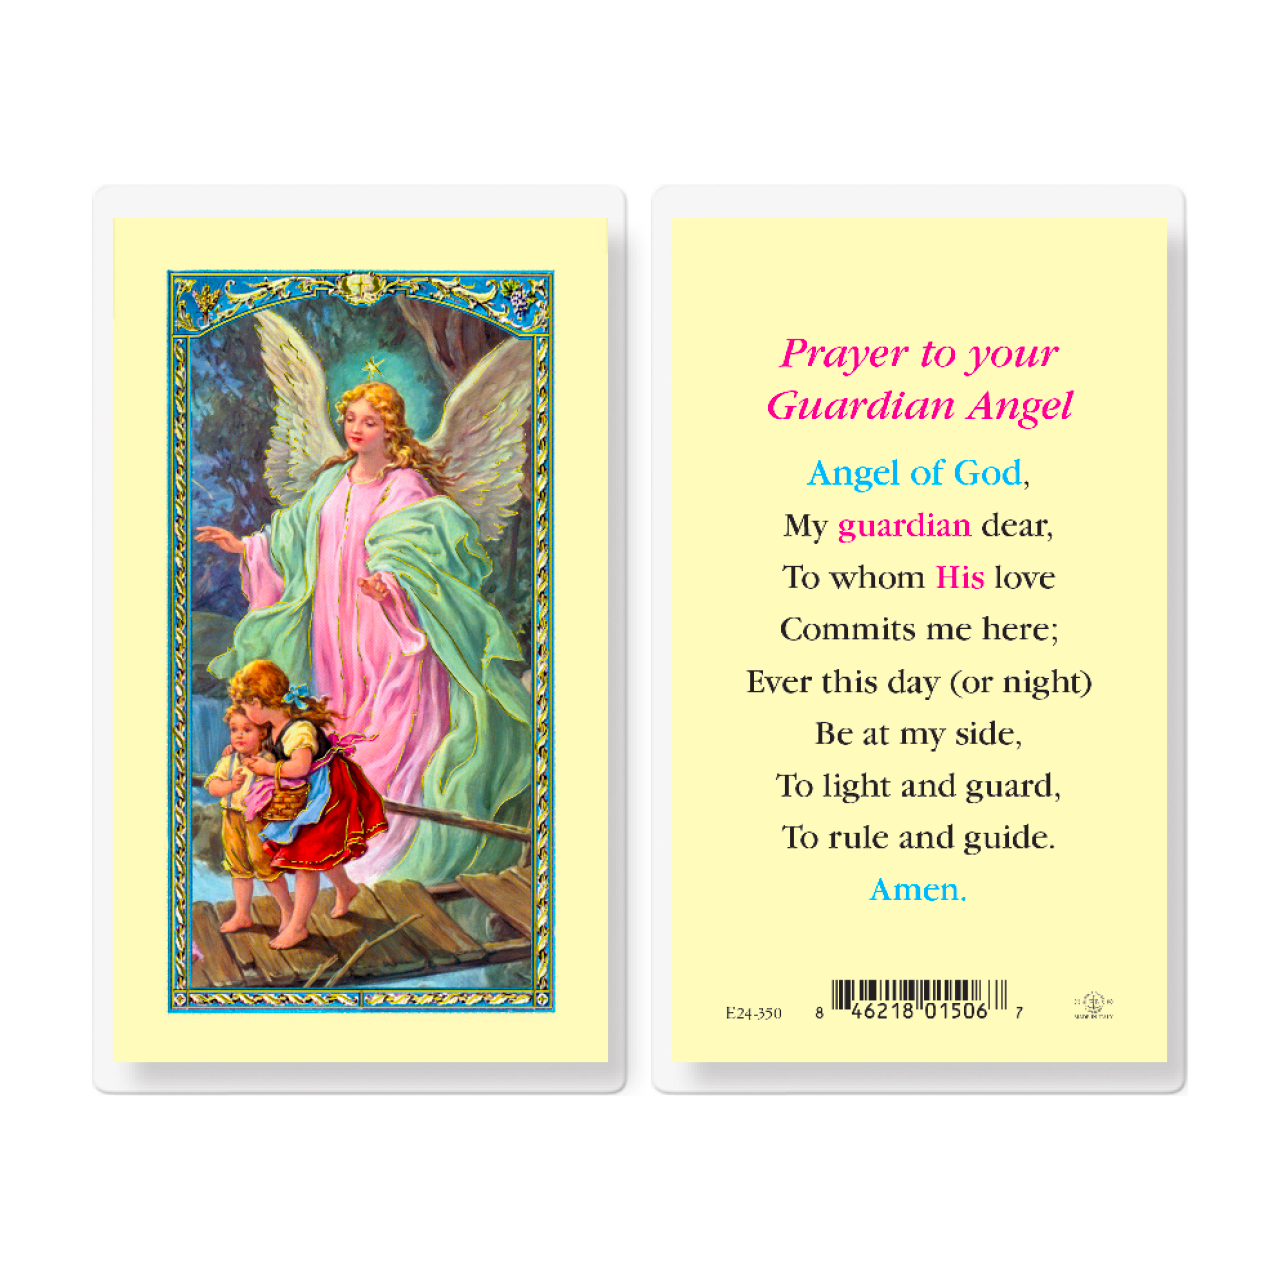 Prayer to Your Guardian Angel Holy Card | Laminated | 800264-E24350